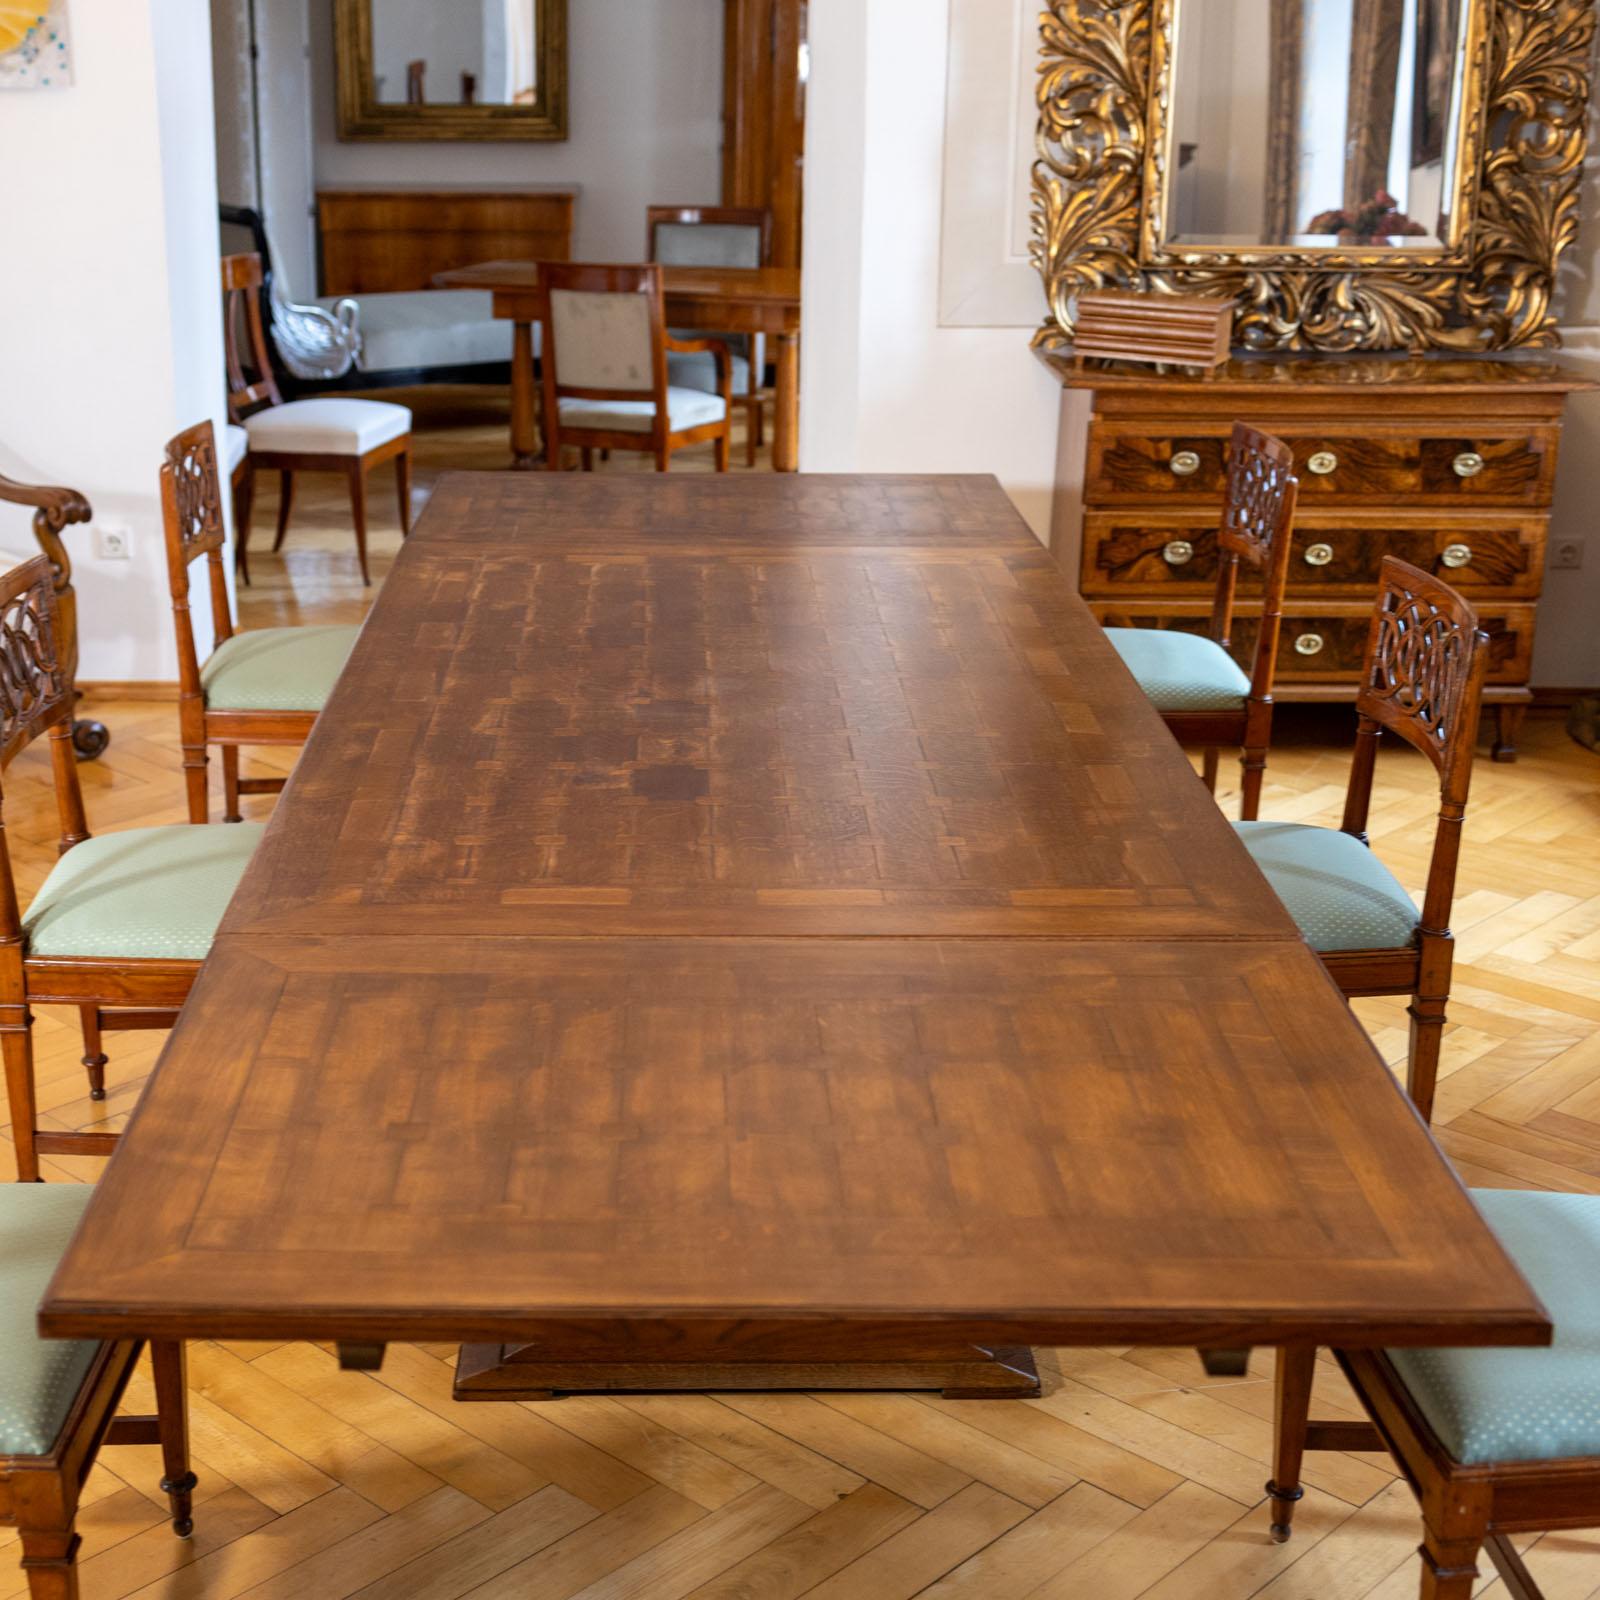 Large Art Nouveau Extension Table in Oak, Early 20th Century For Sale 1